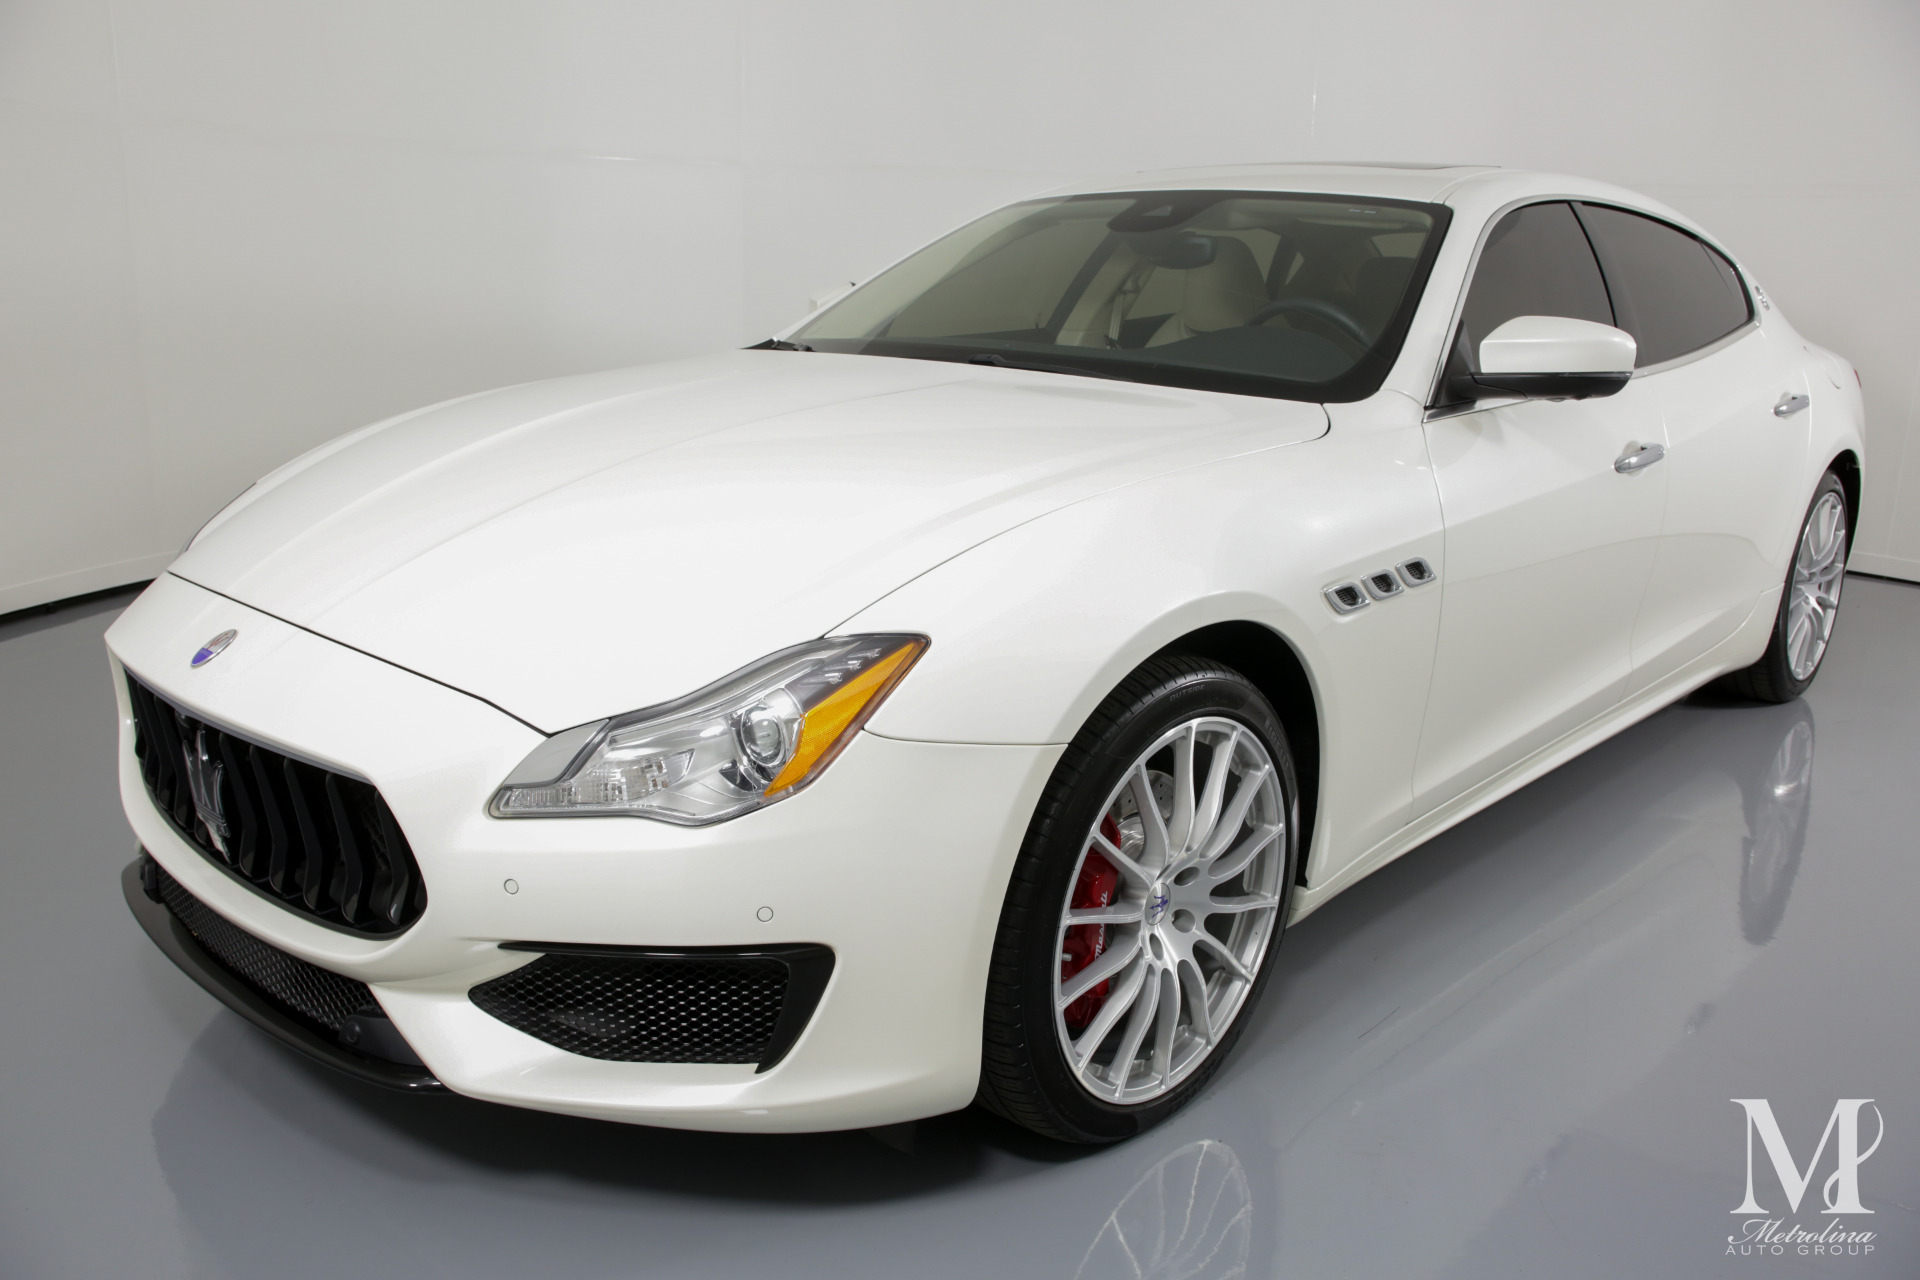 Used 2017 Maserati Quattroporte S GranSport for sale Sold at Metrolina Auto Group in Charlotte NC 28217 - 4